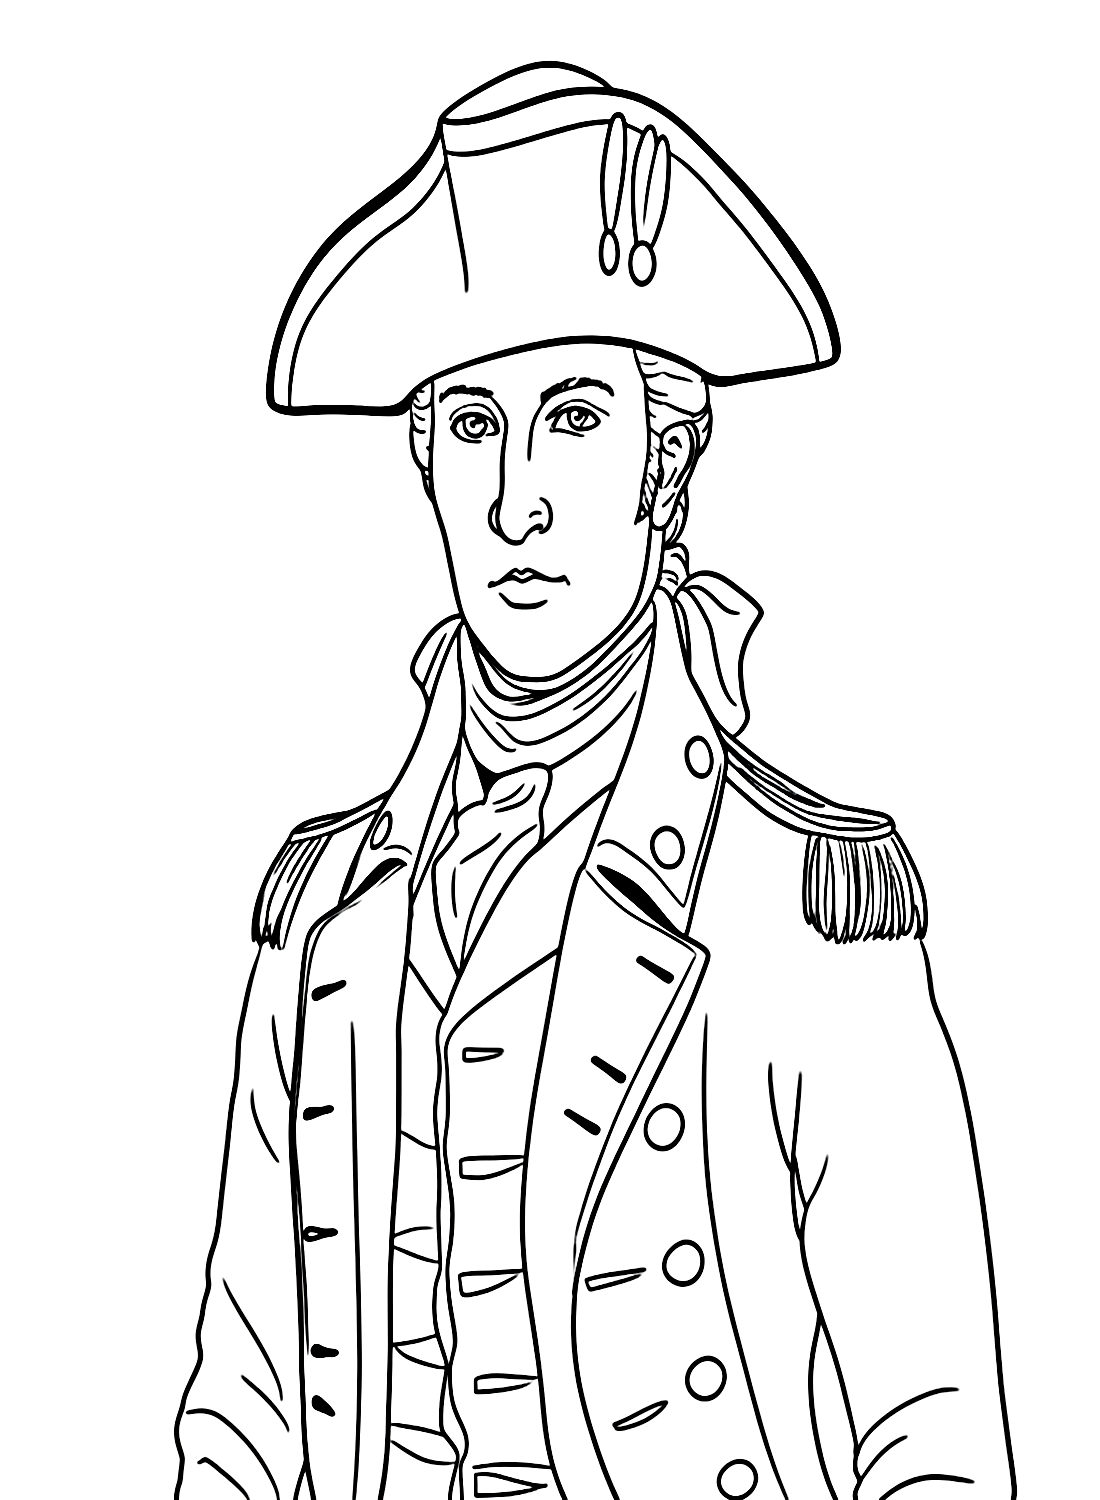 Alexander hamilton coloring pages printable for free download